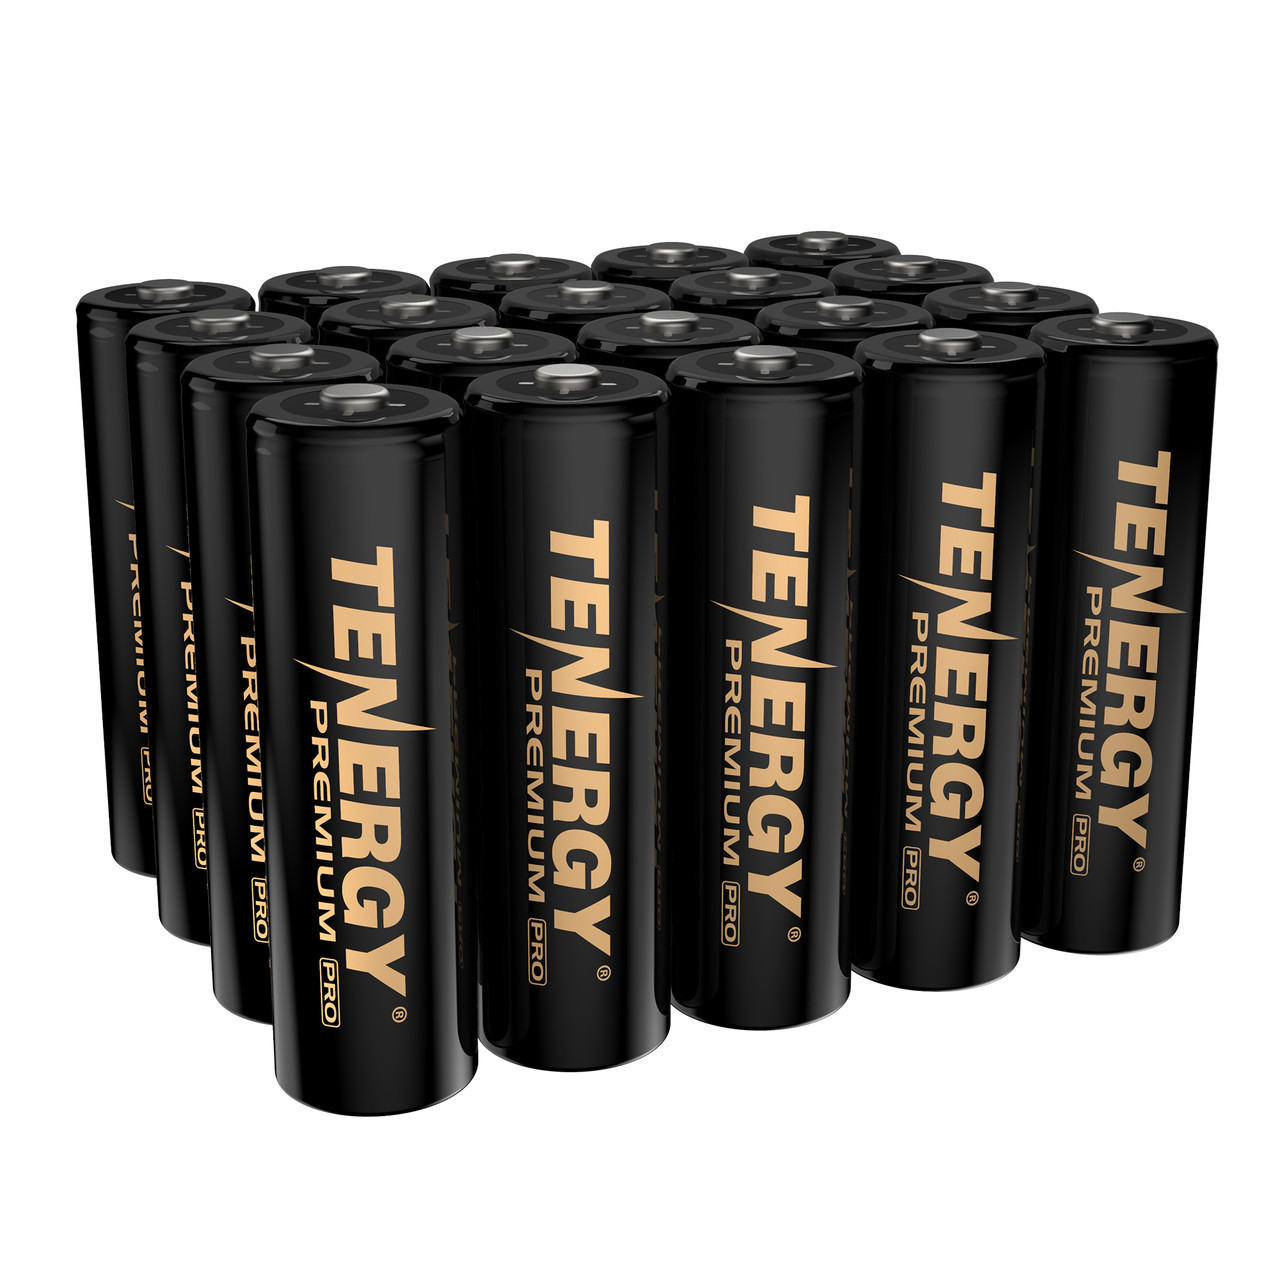 this is  High Capacity Low Self-Discharge 2800mAh NiMH AA Battery, 20 Pack